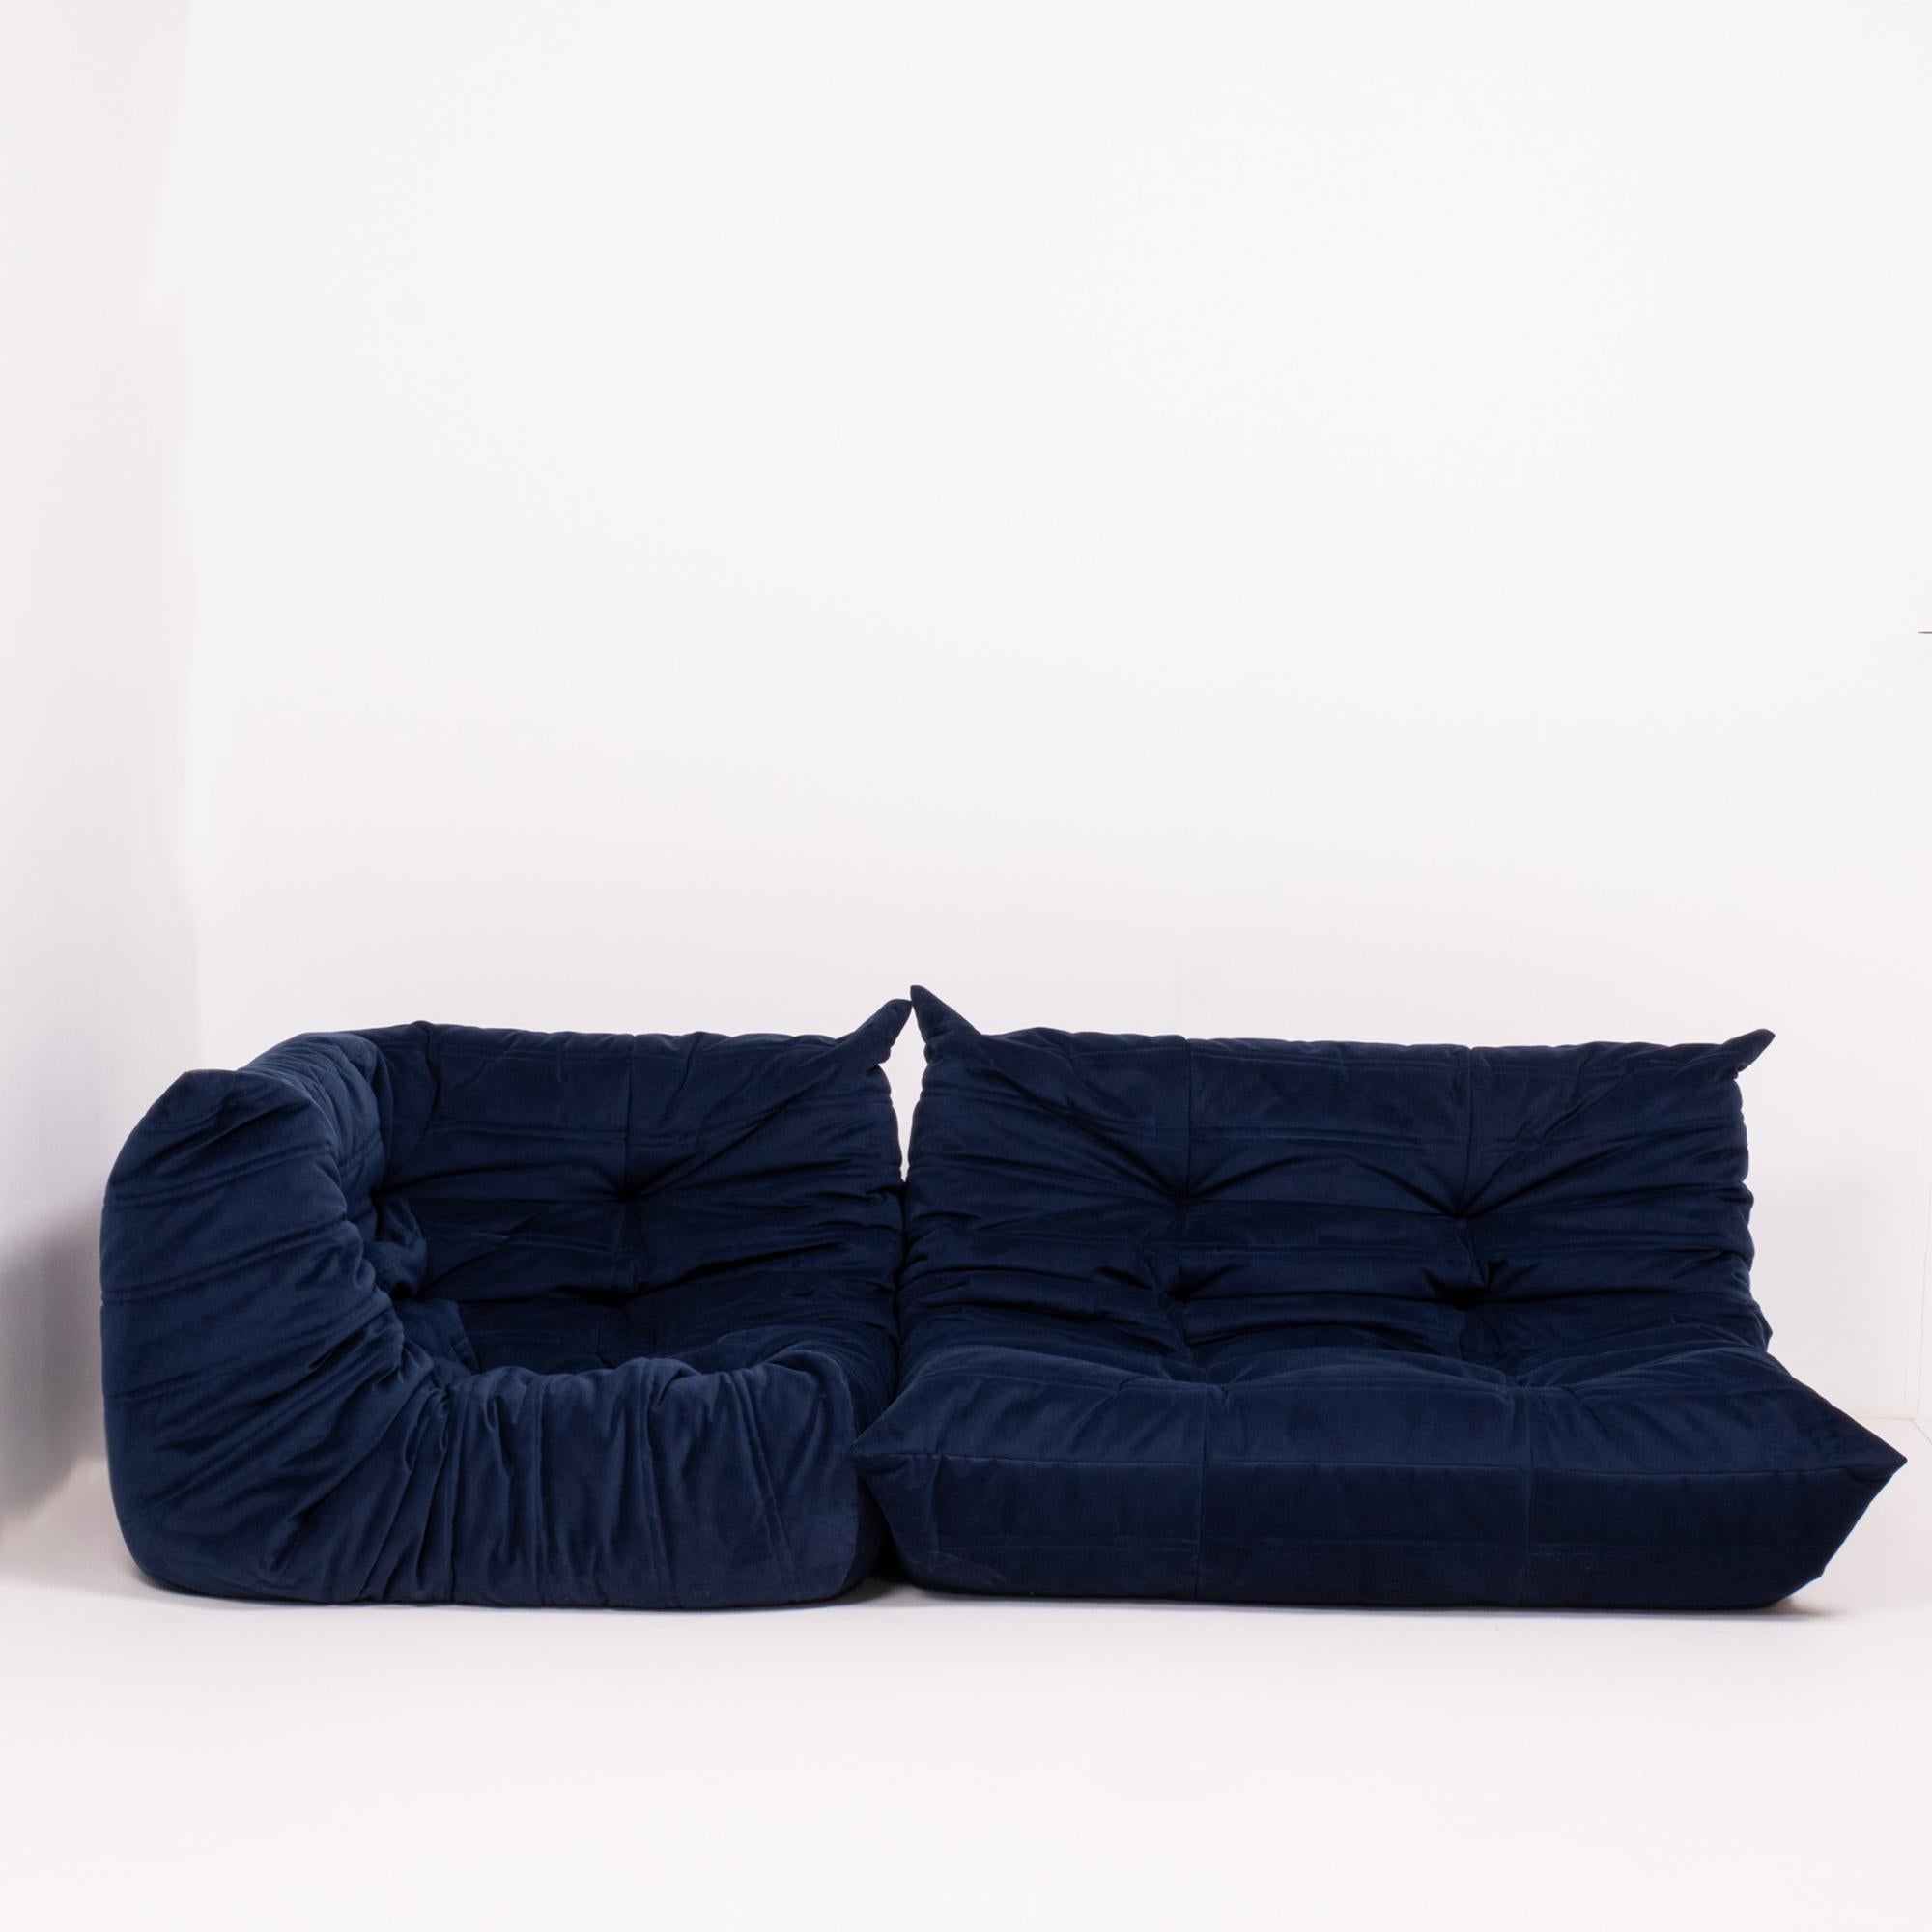 Late 20th Century Togo Blue Modular Sofa and Footstool by Michel Ducaroy for Ligne Roset